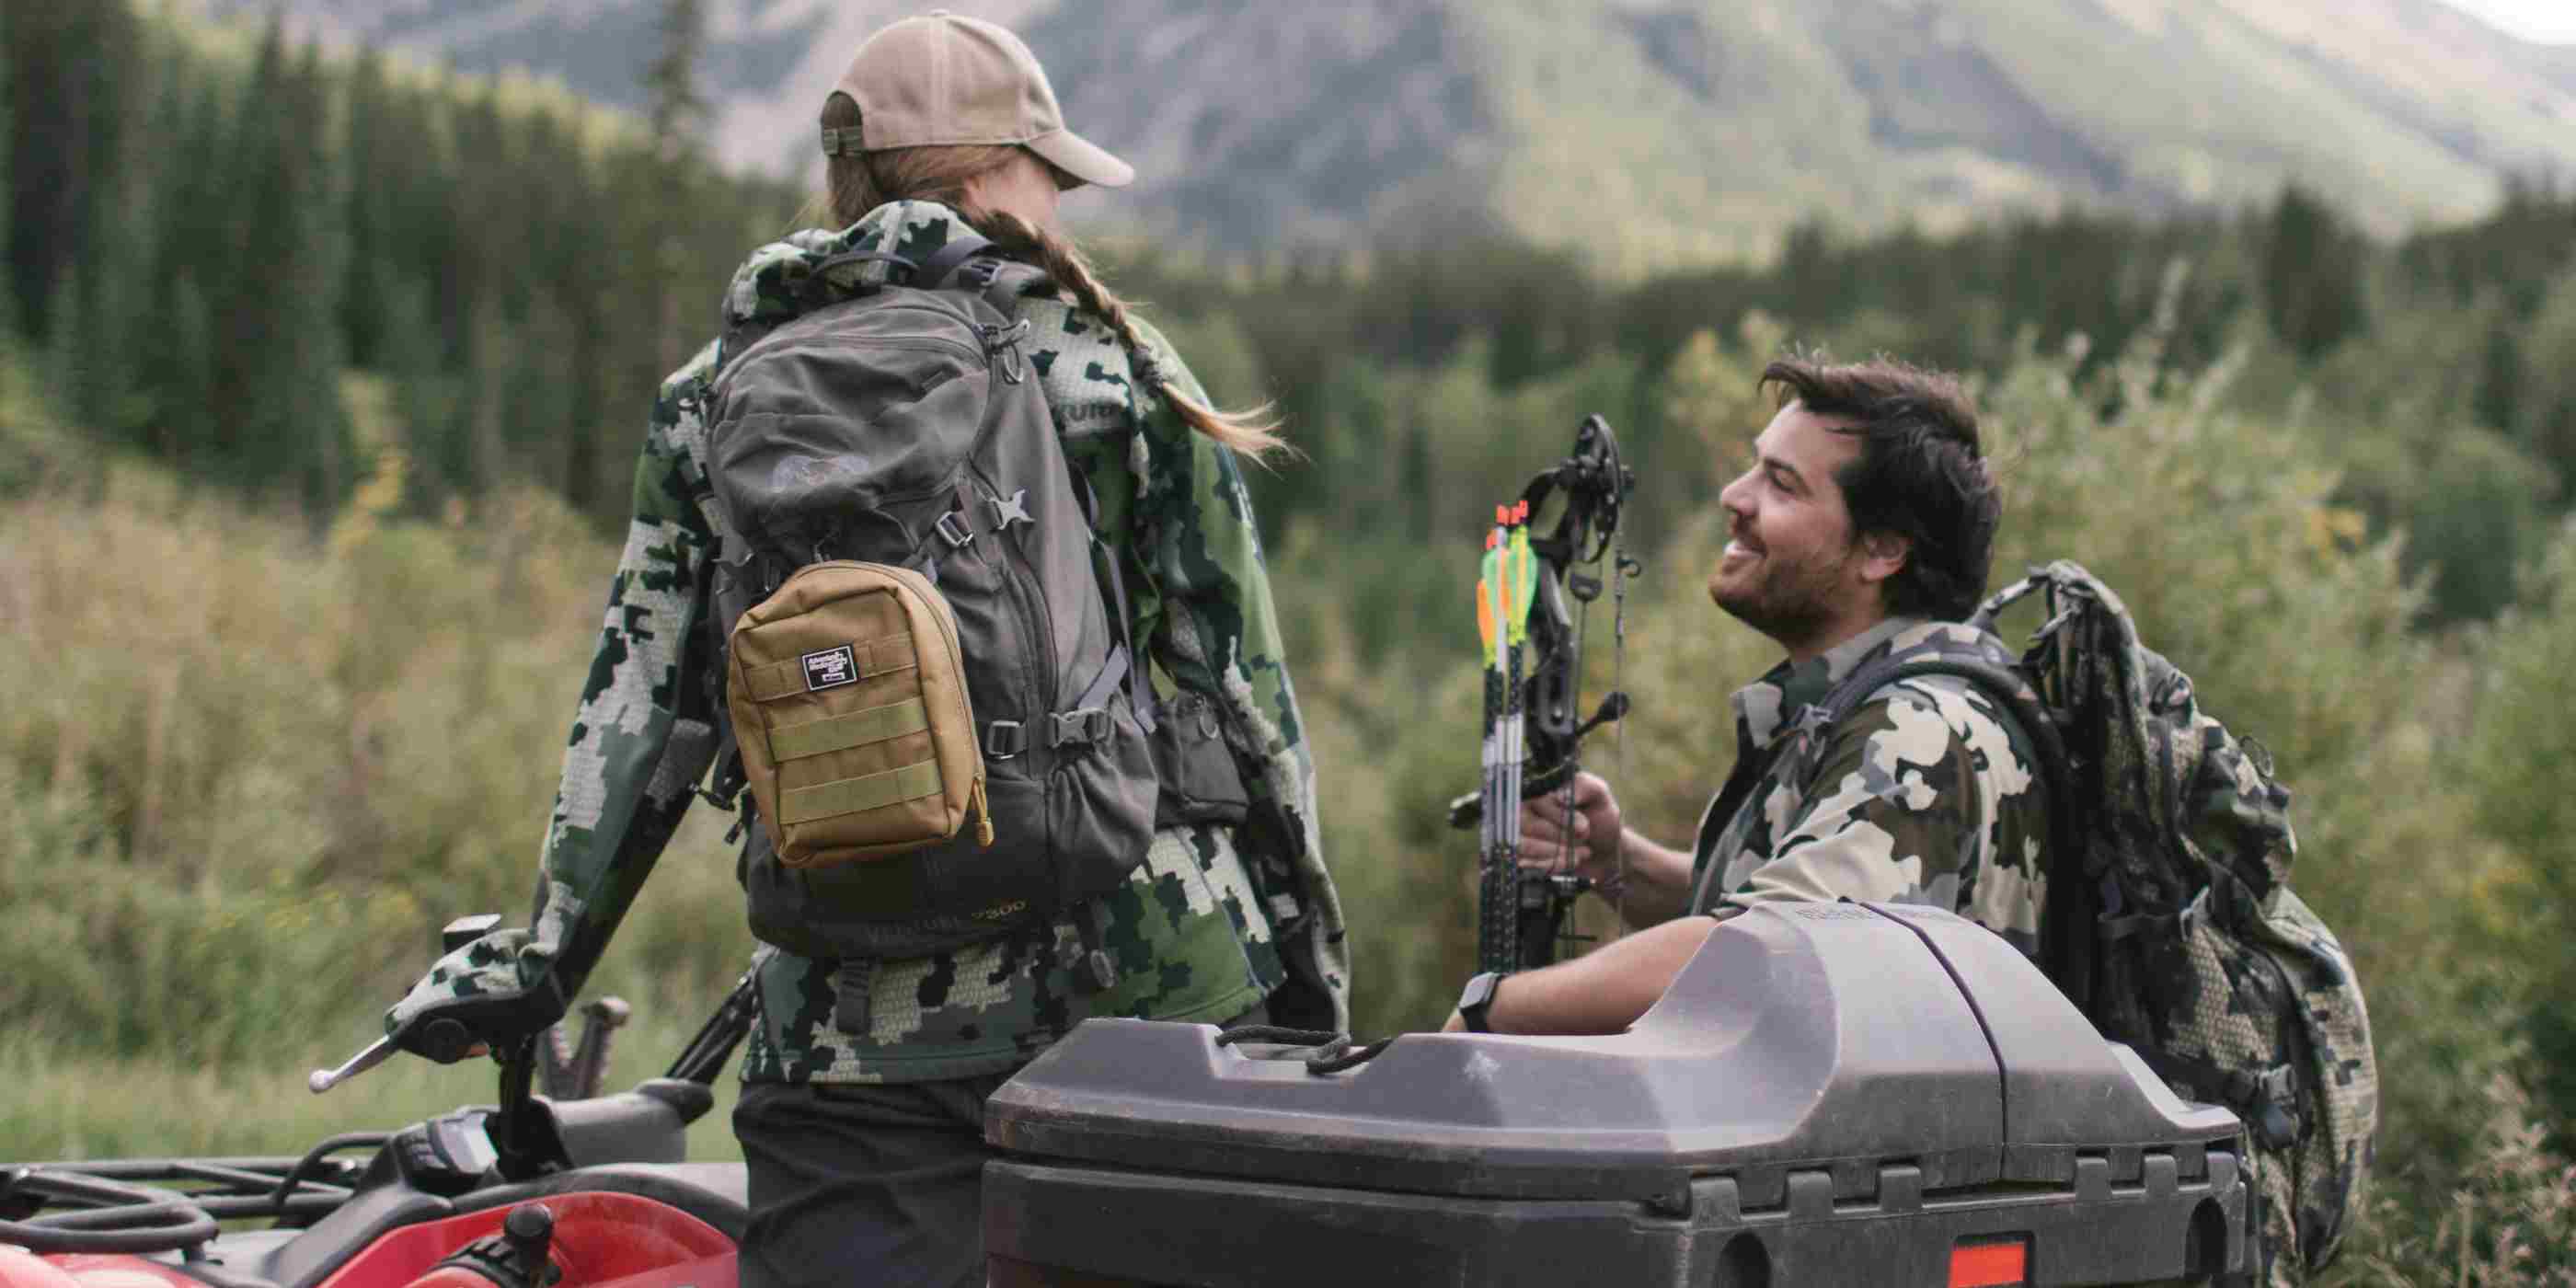 MOLLE Bag Trauma Kit 2.0 - Khaki kit attached to backpack of woman in camo on ATV next to man with bow and arrow